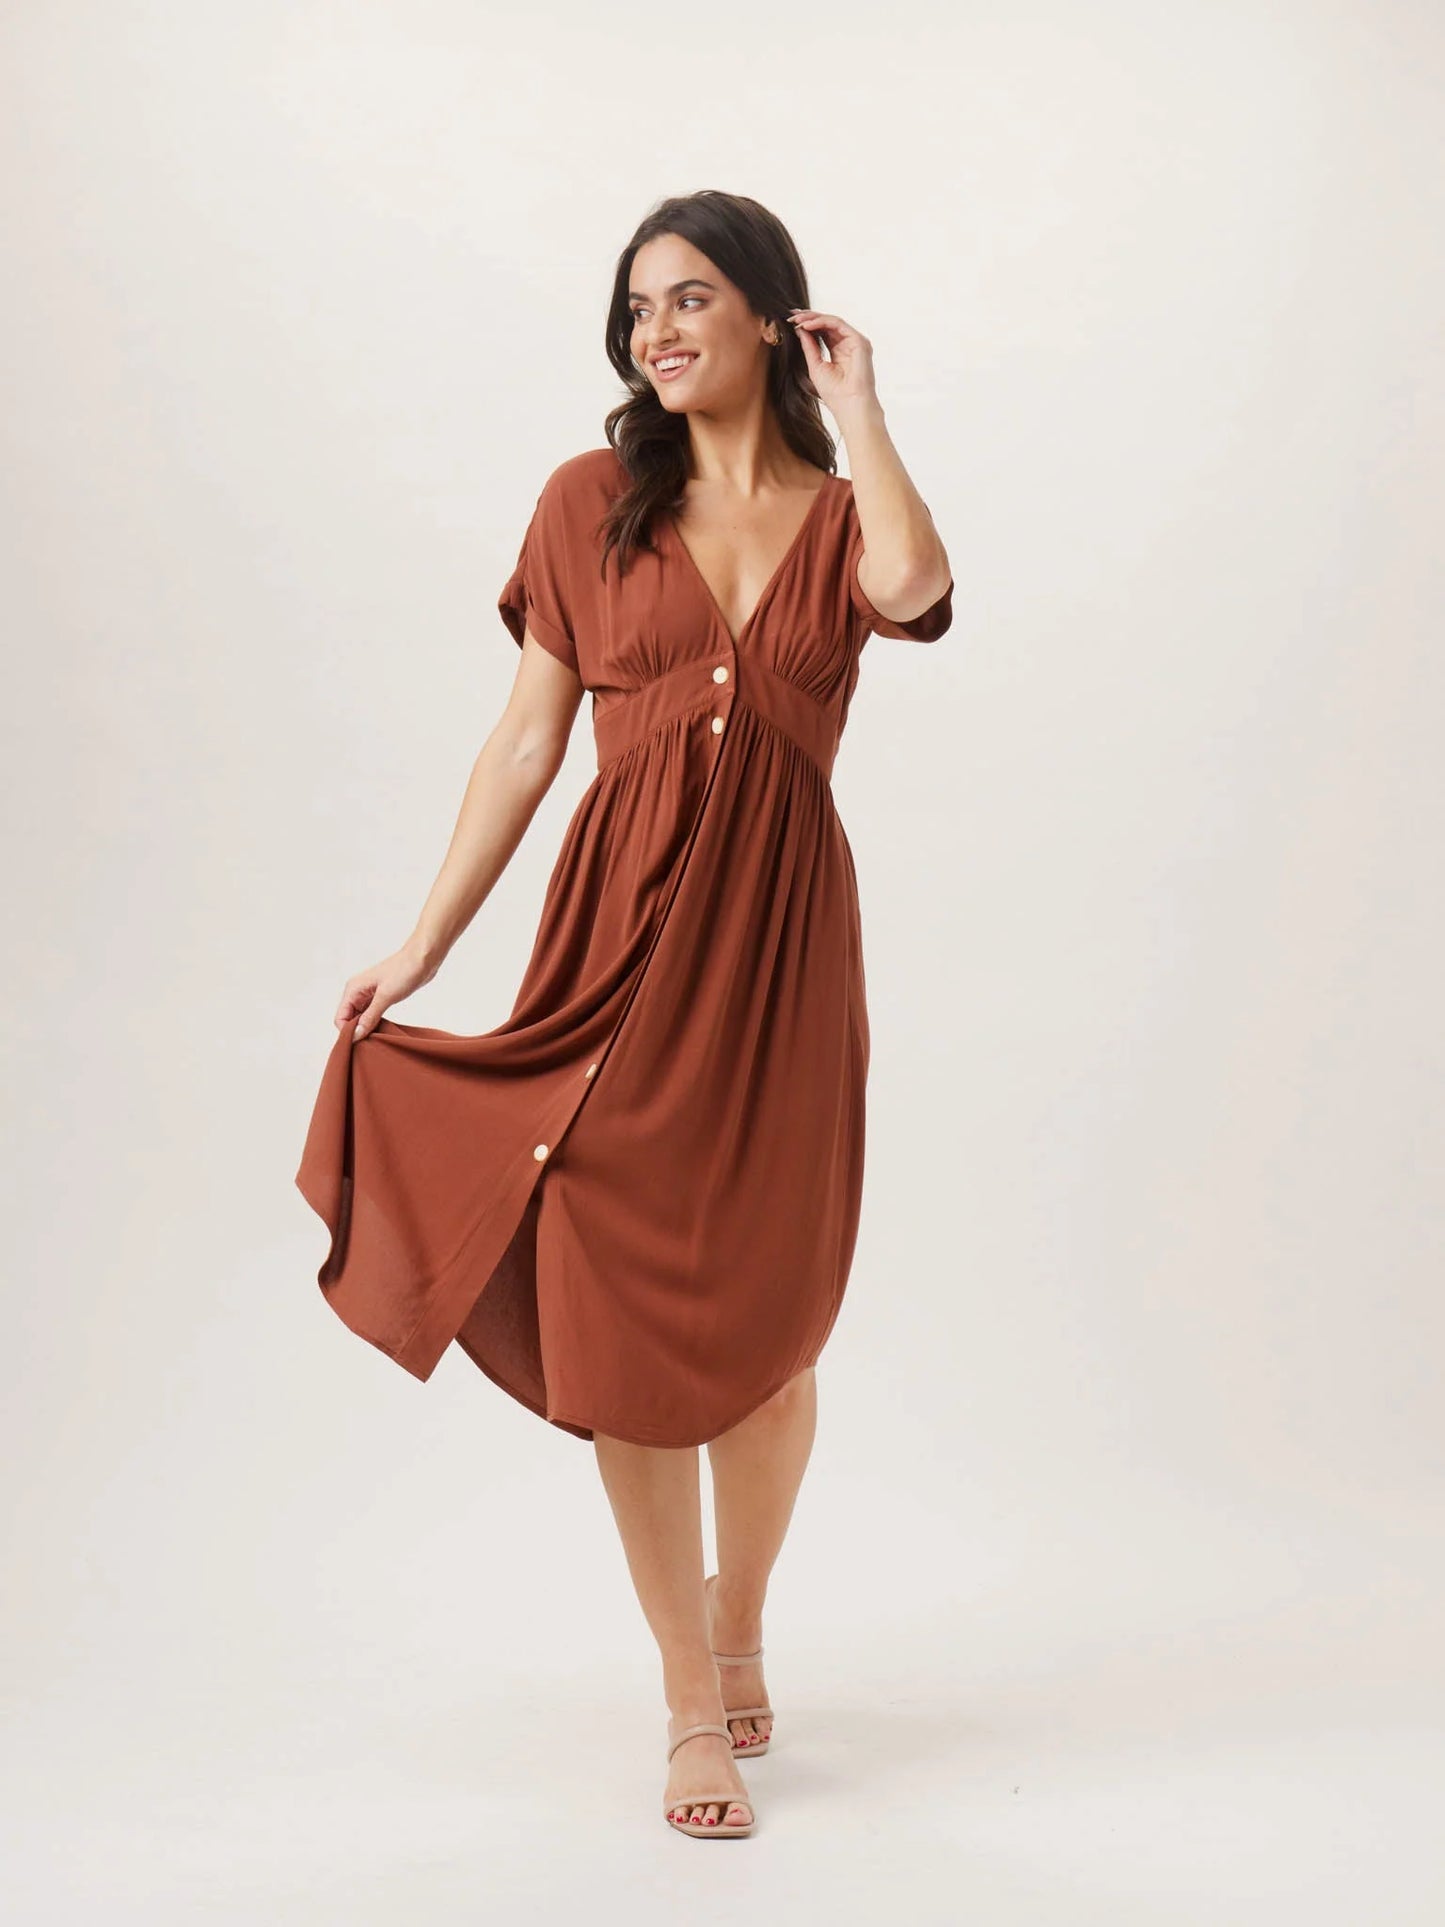 The Normal Brand's Deep V Button Thru Dress in the color Clay